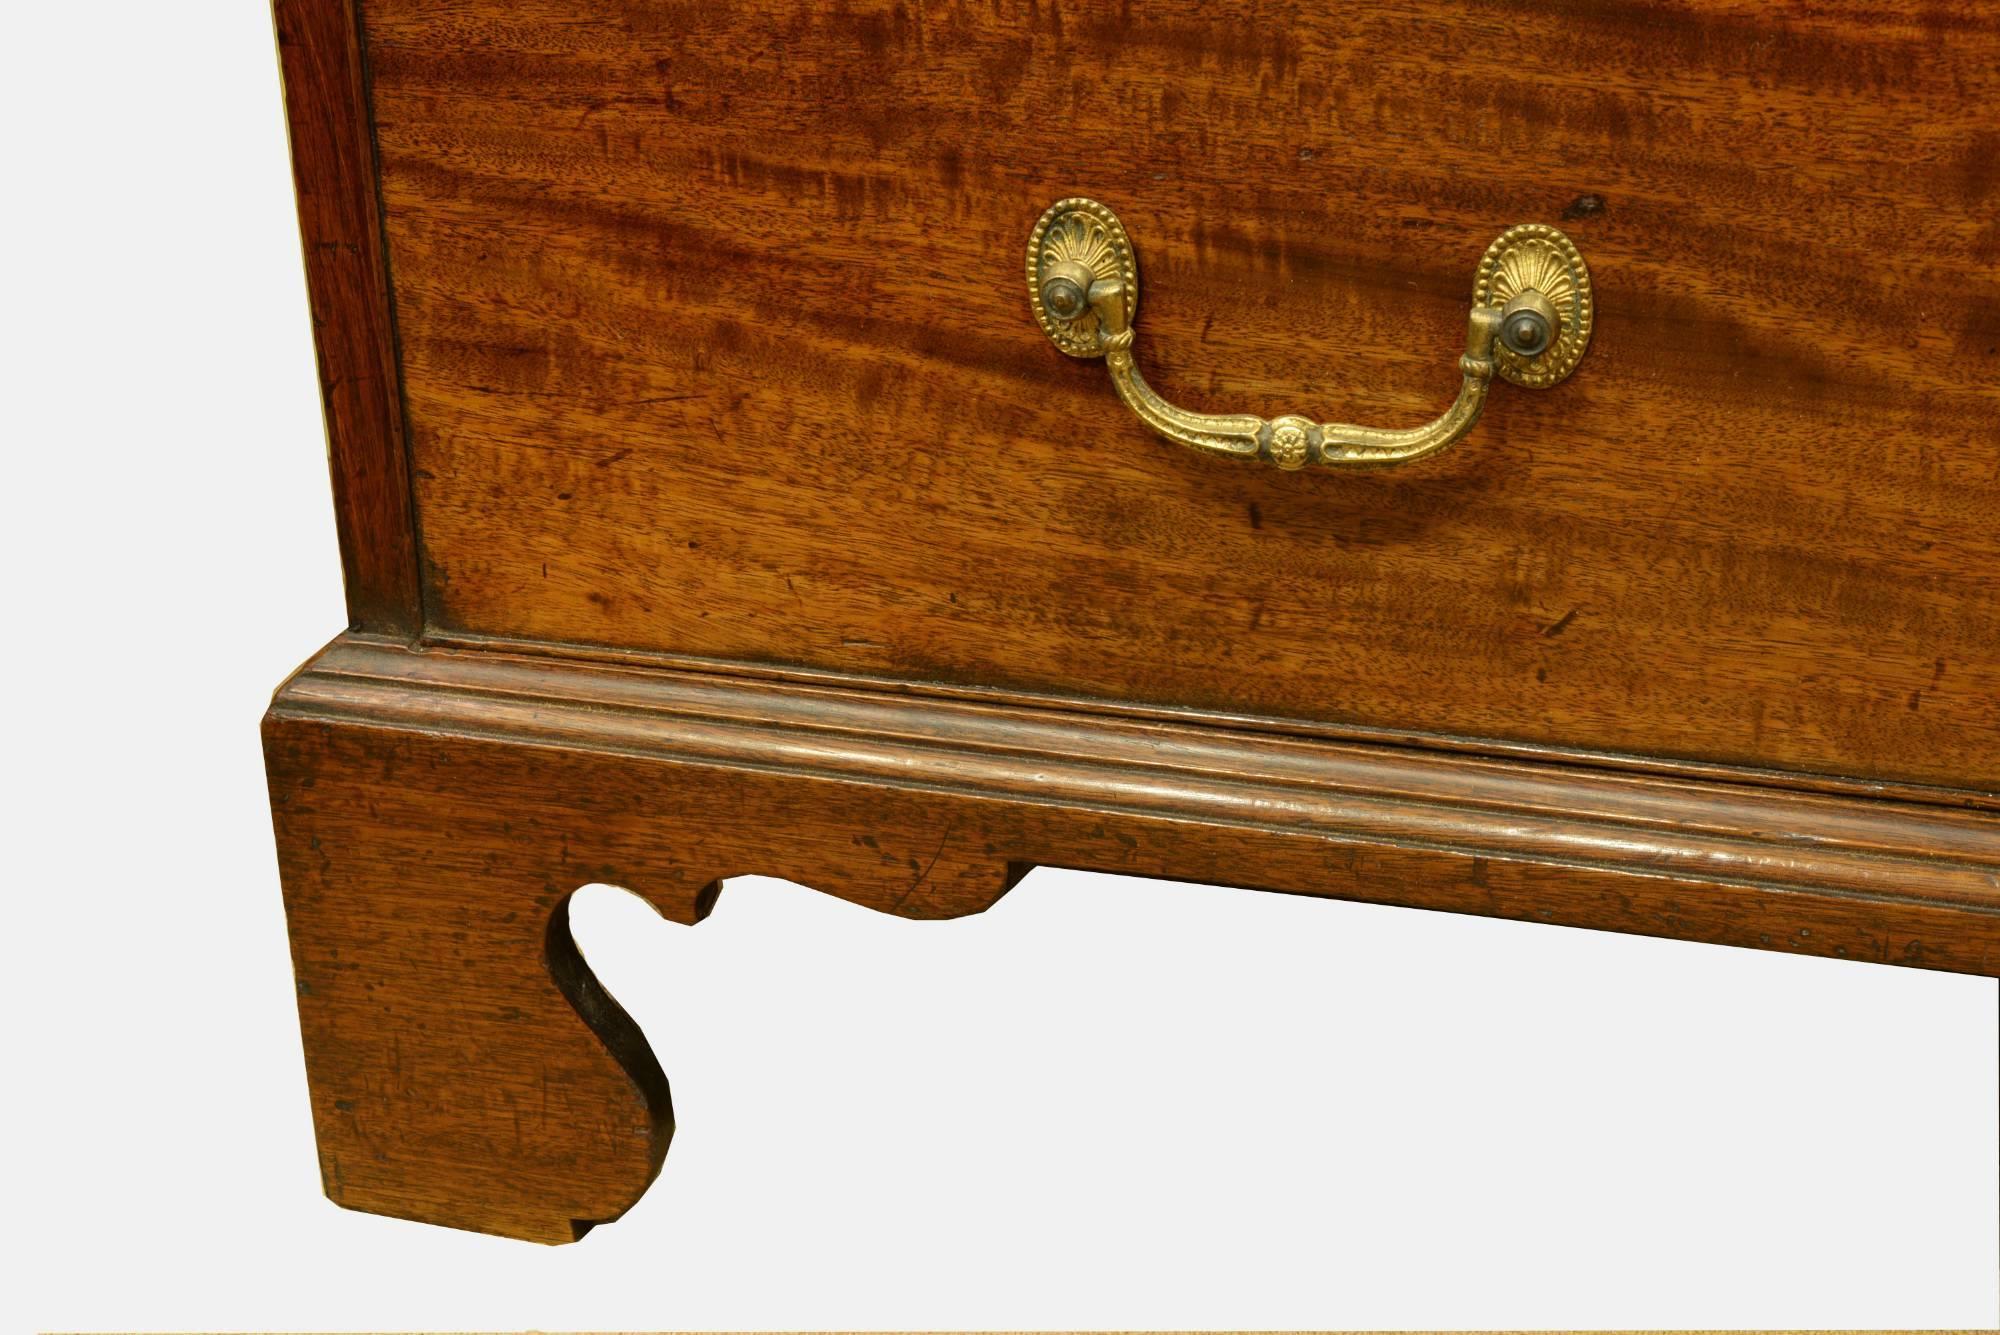 A George III mahogany tallboy or chest on chest. With dentil cornice, blind fret frieze, finely figured drawers fronts and original gilt brasses. Original feet, attractively narrow proportion,

circa 1780.